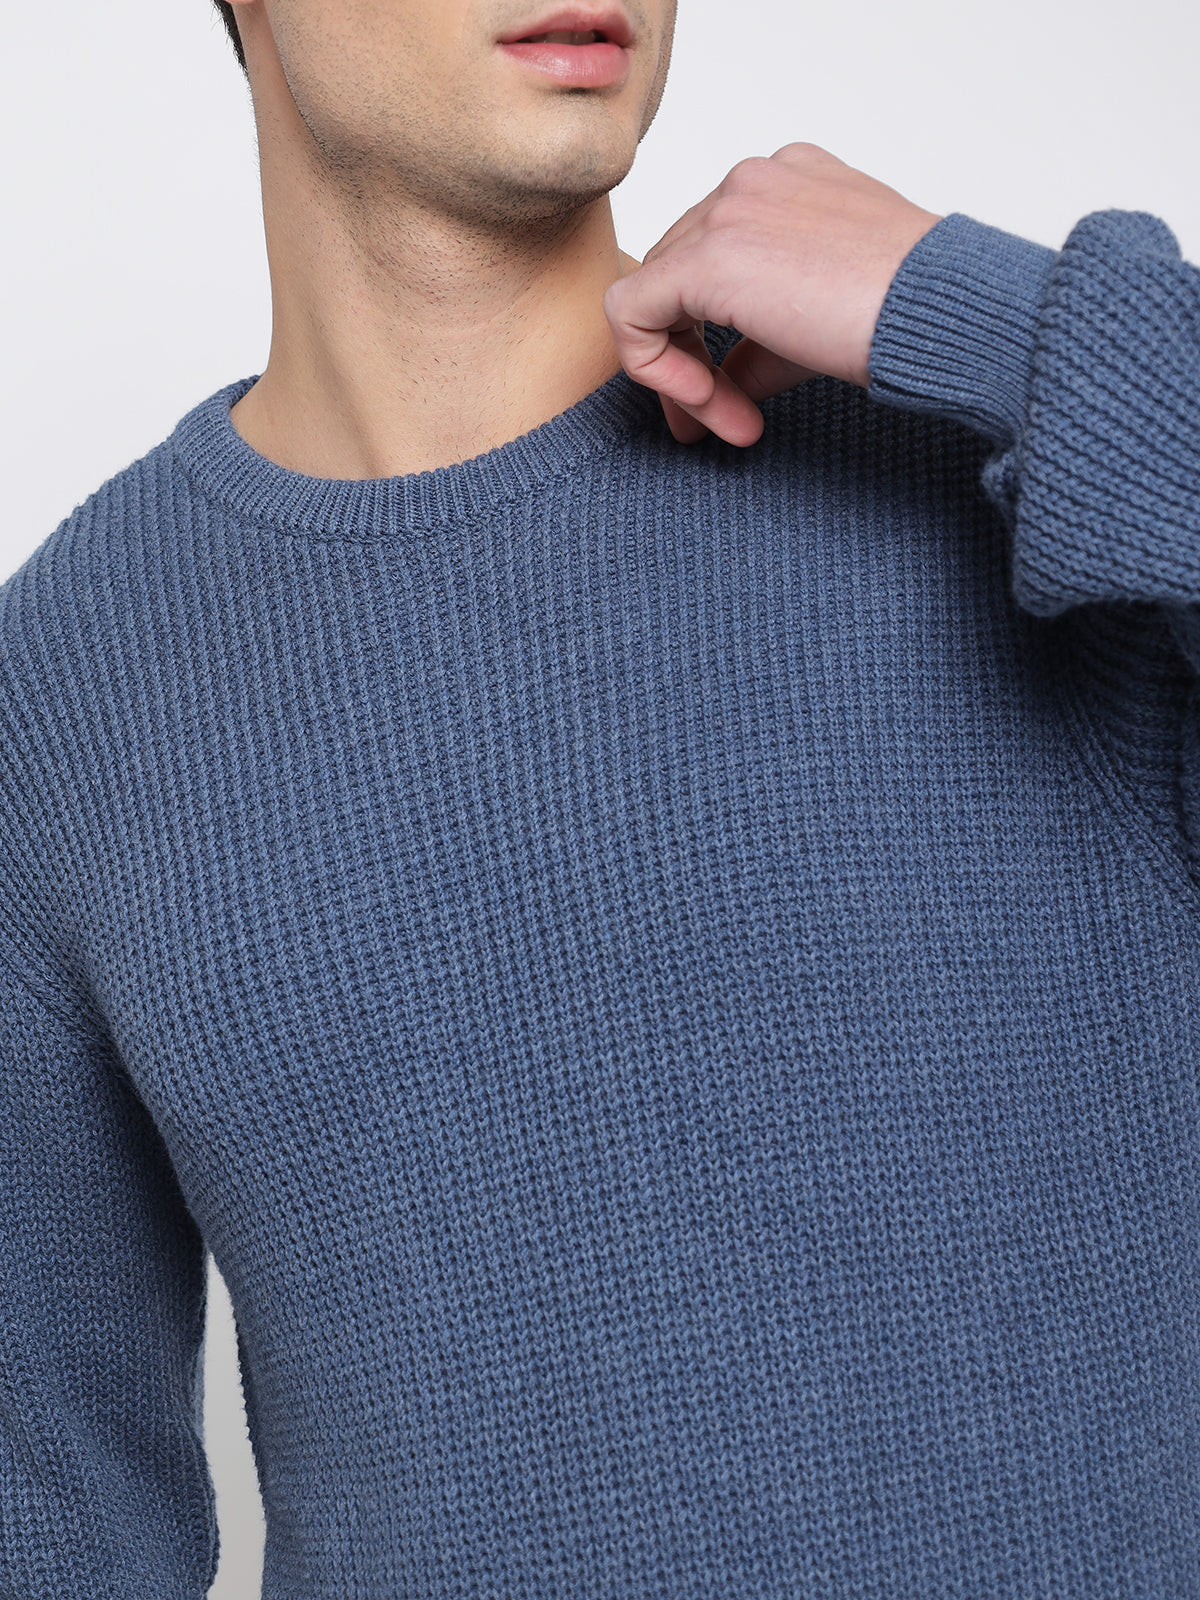 PURL KNIT SWEATER - Navy blue